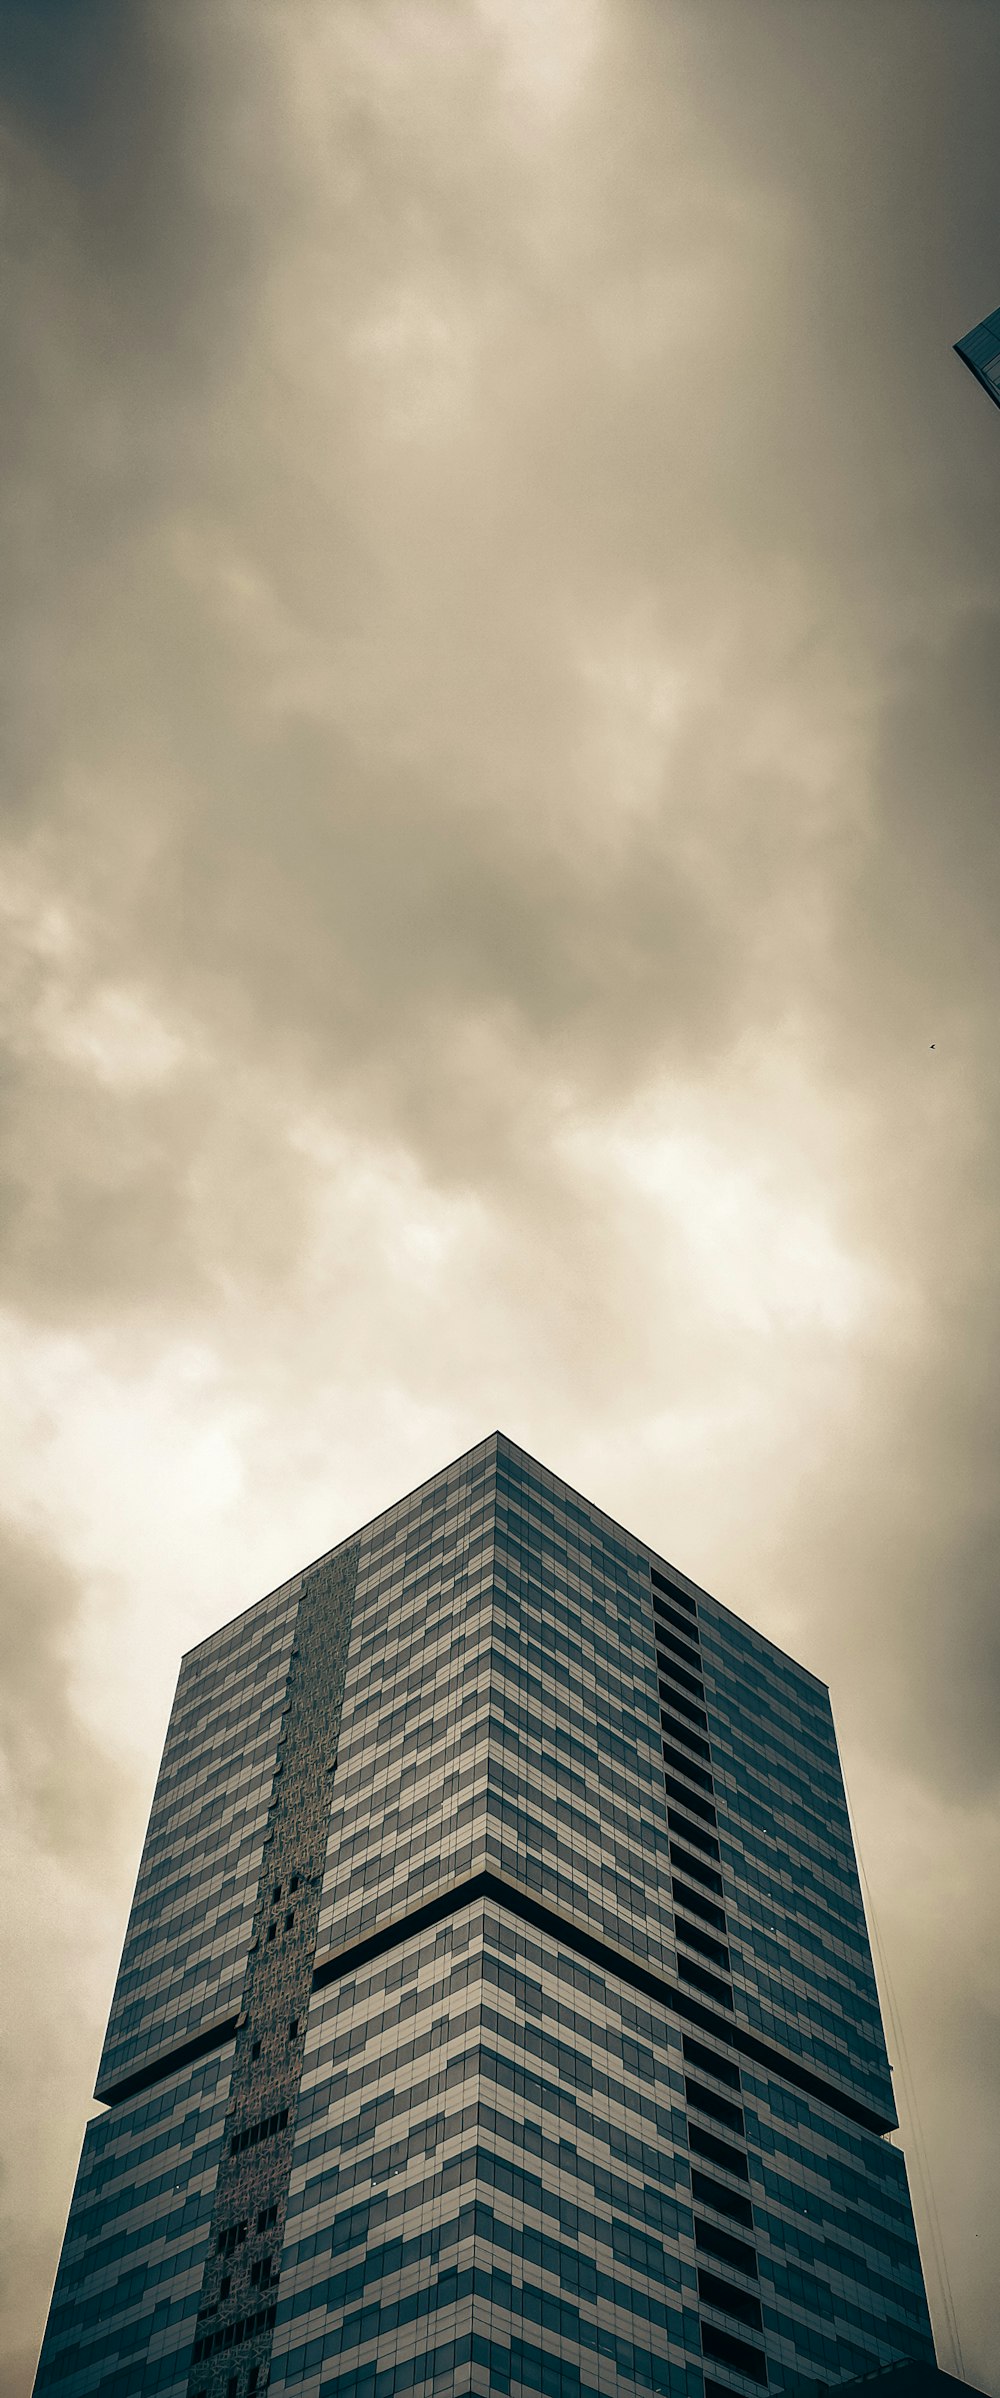 a tall building sitting under a cloudy sky